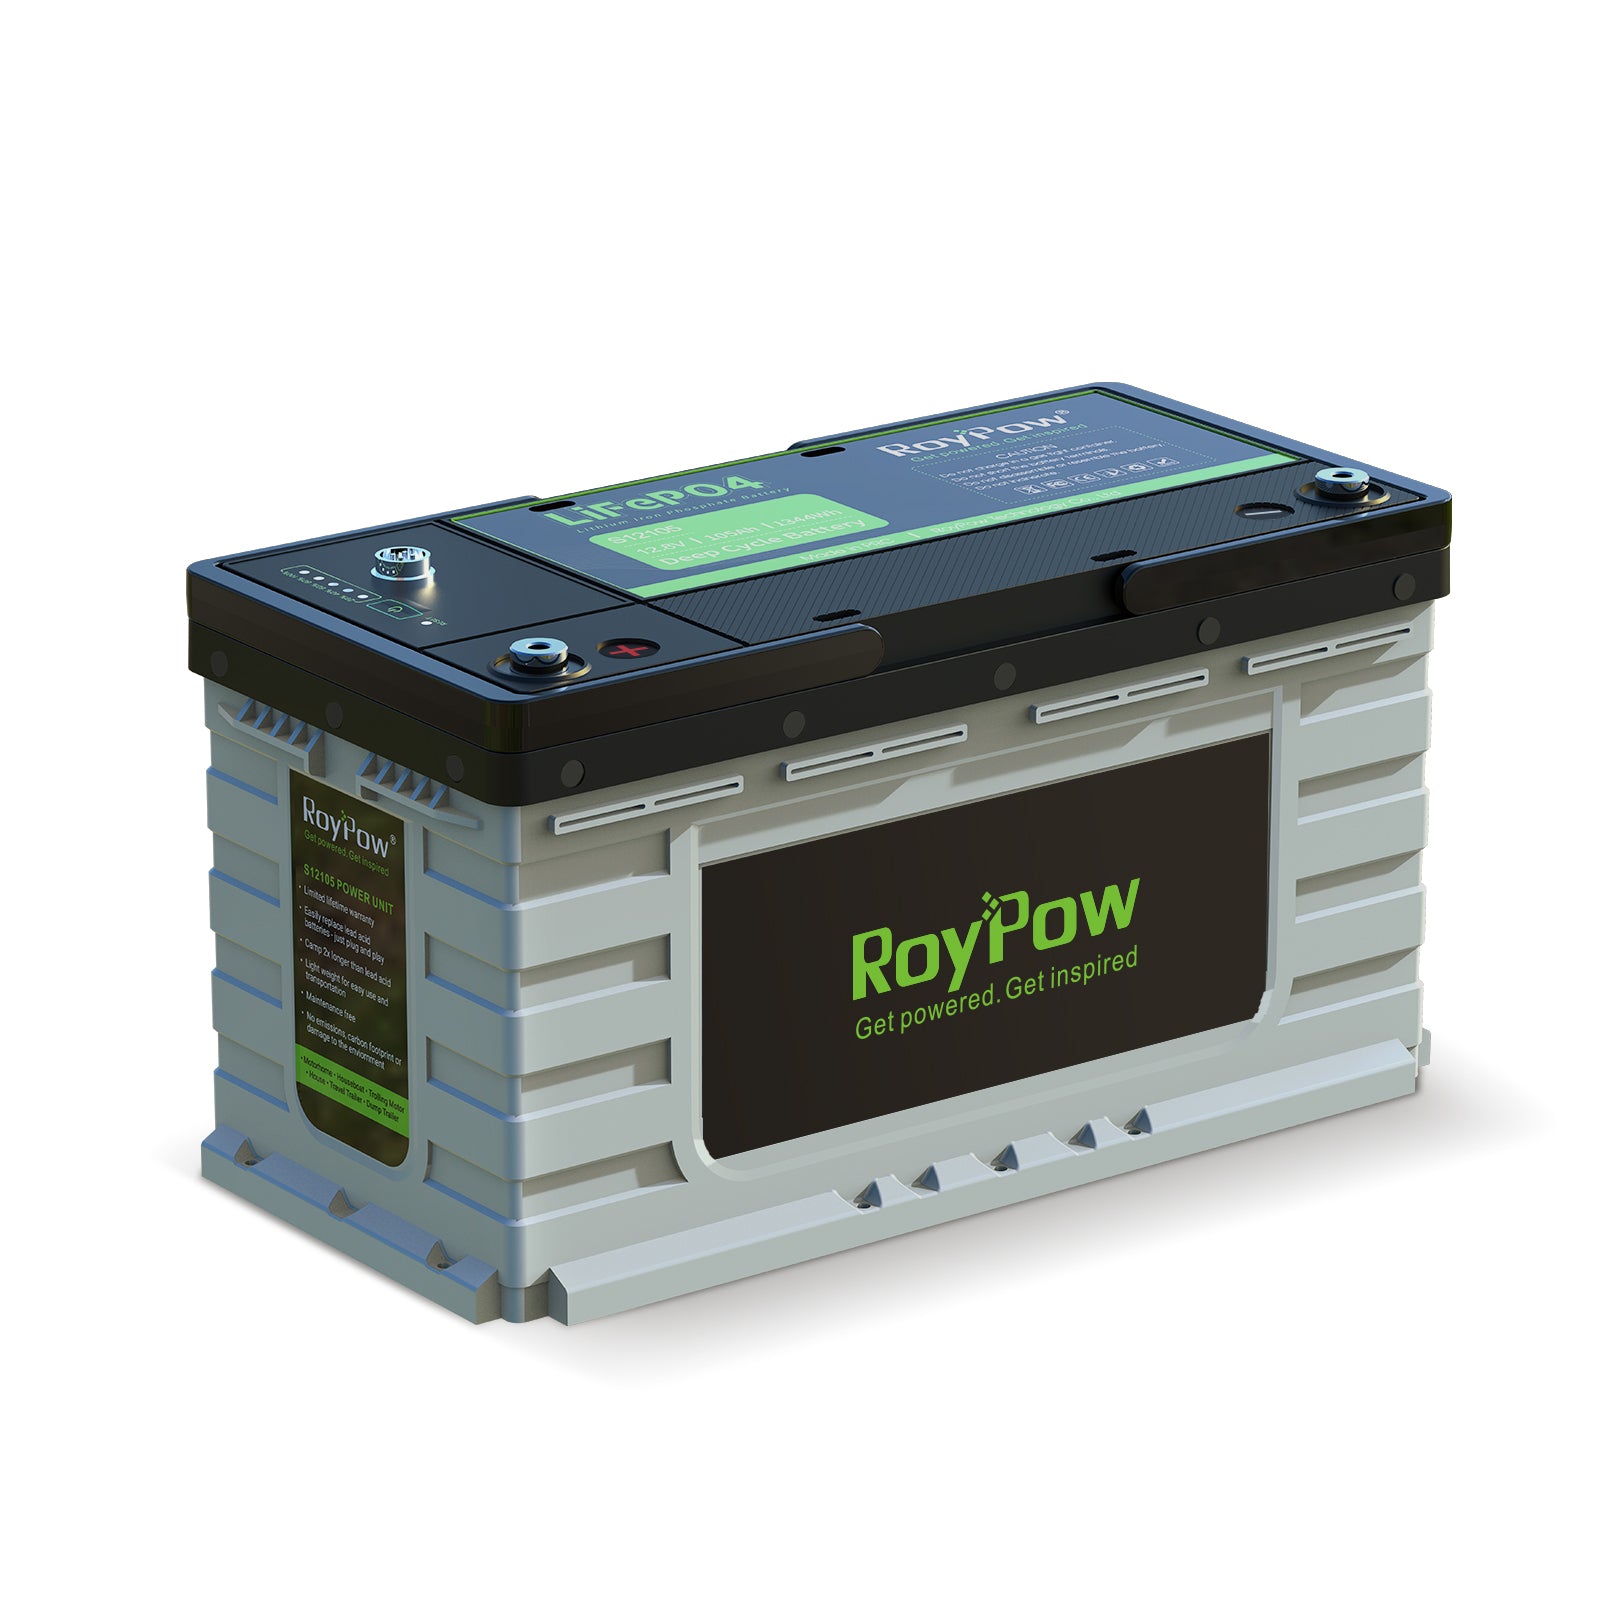 RoyPow 12V 105AH LiFePO4 deep cycle rechargeable battery